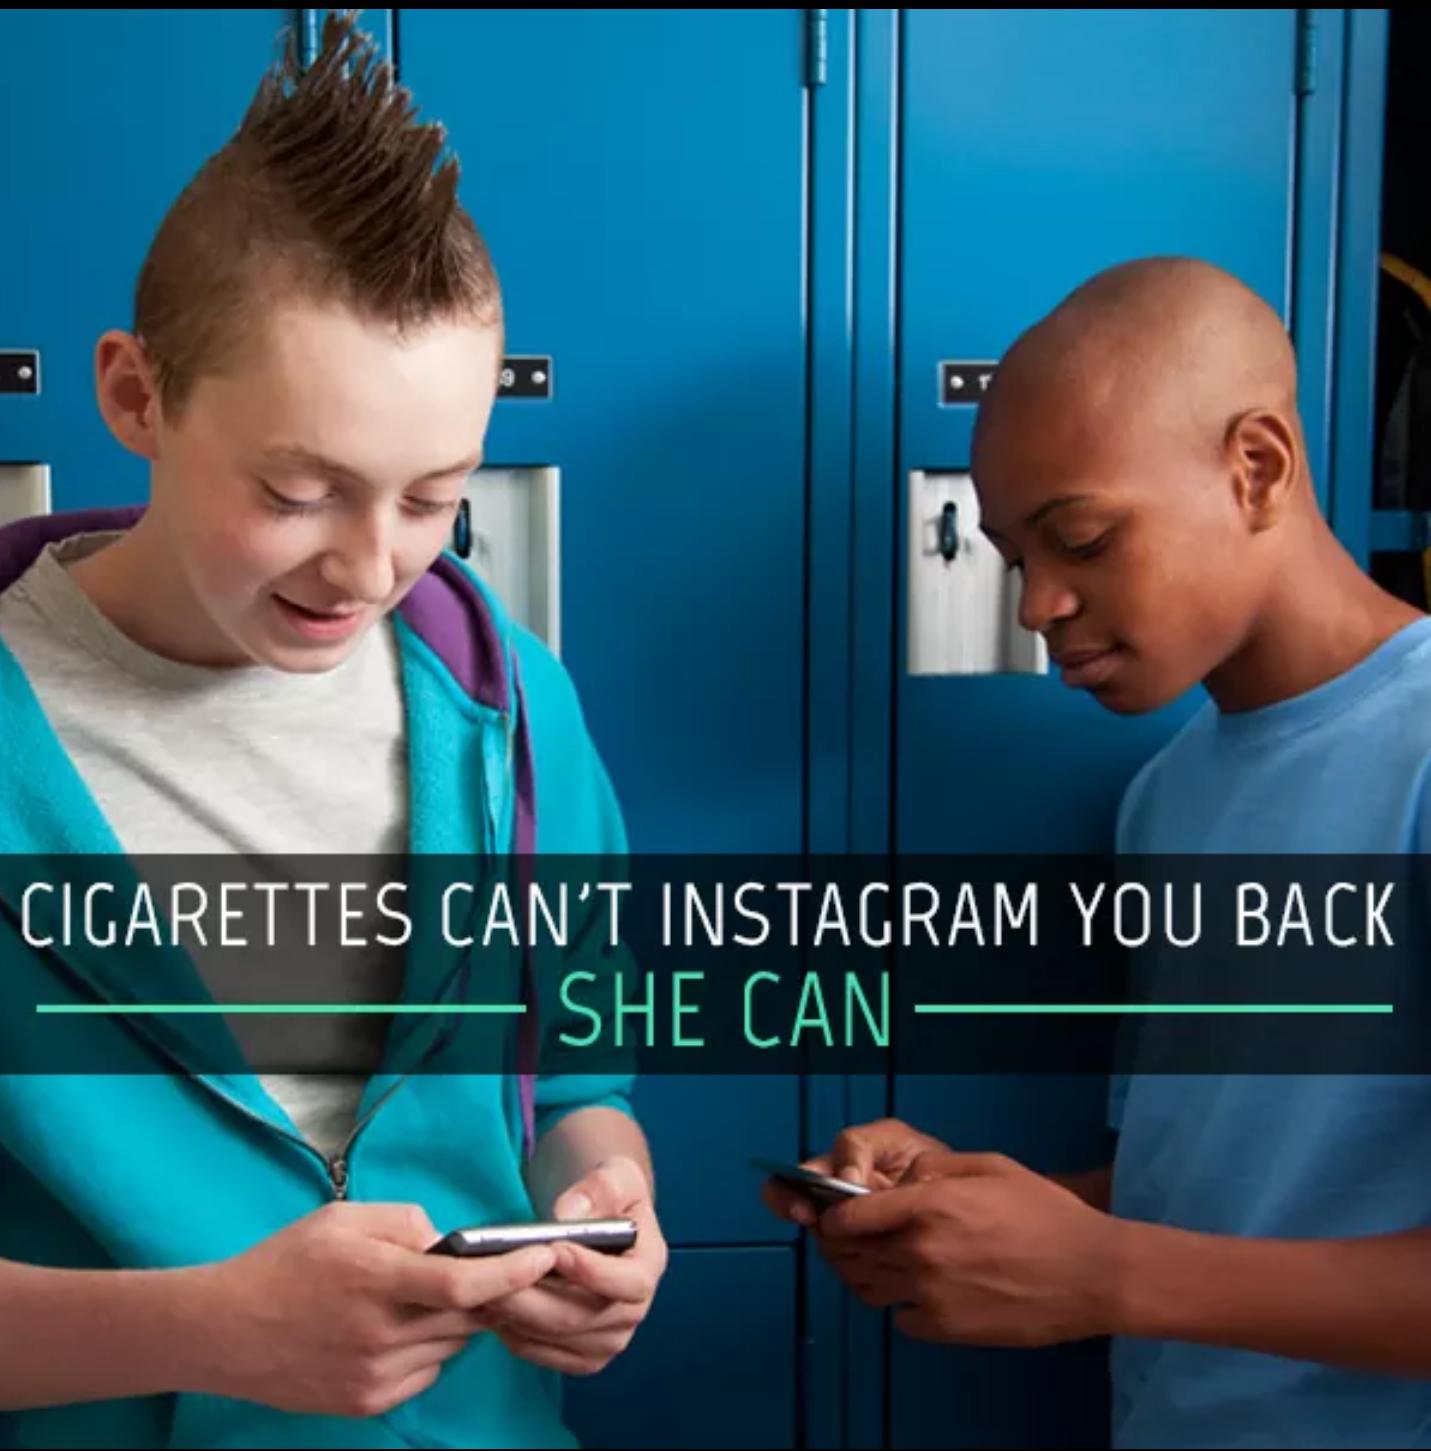 arm - Cigarettes Can'T Instagram You Back She Can